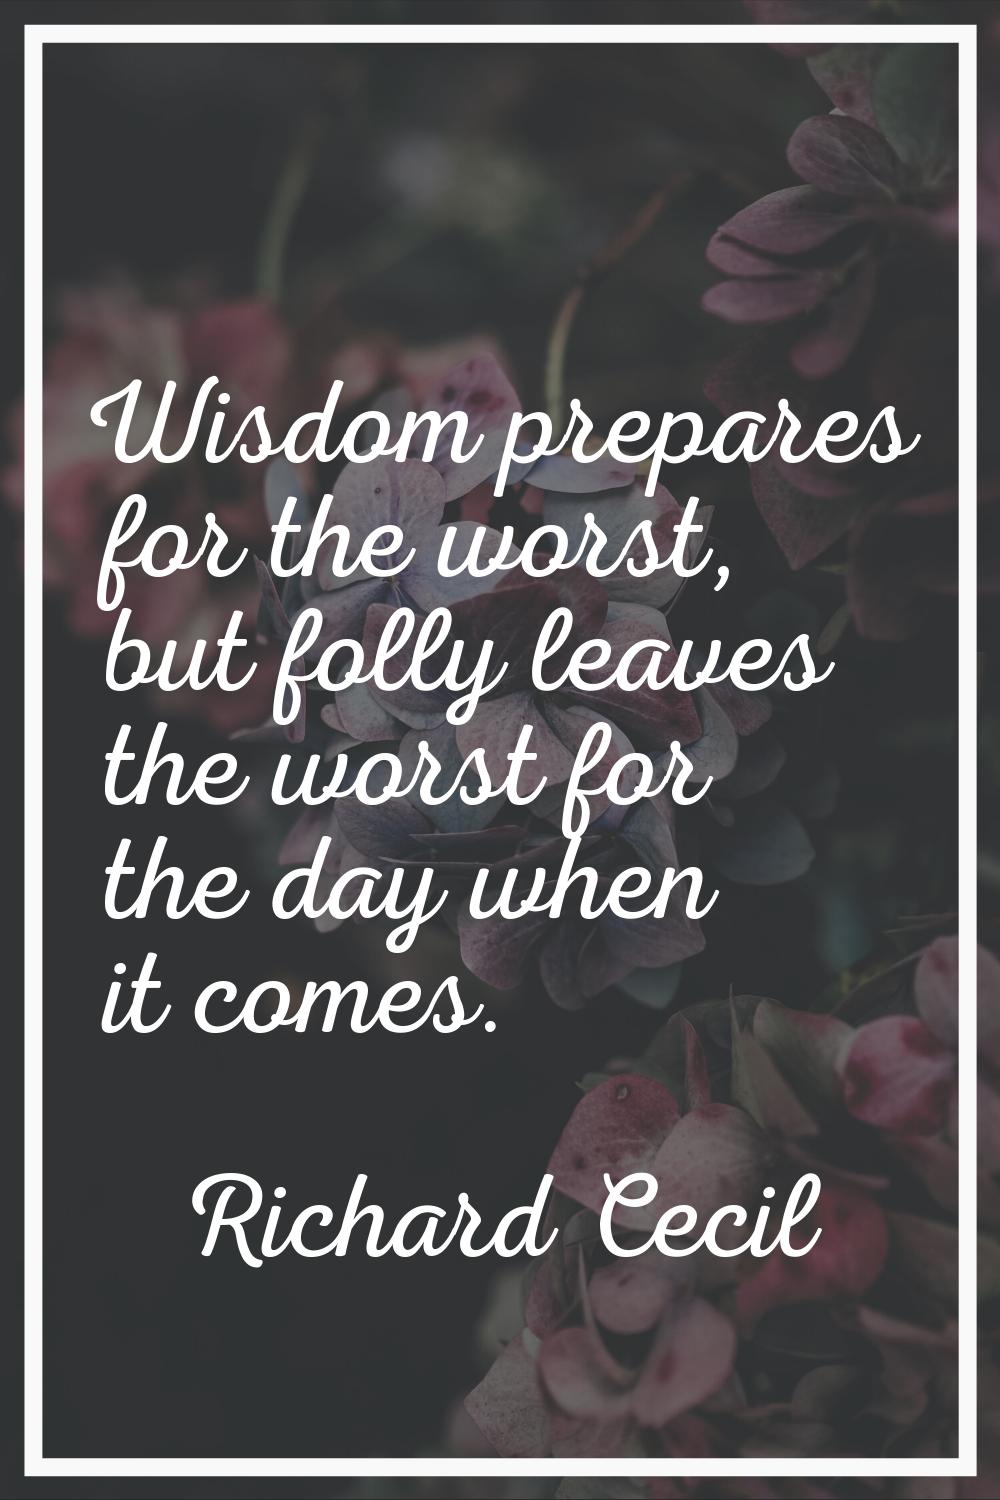 Wisdom prepares for the worst, but folly leaves the worst for the day when it comes.